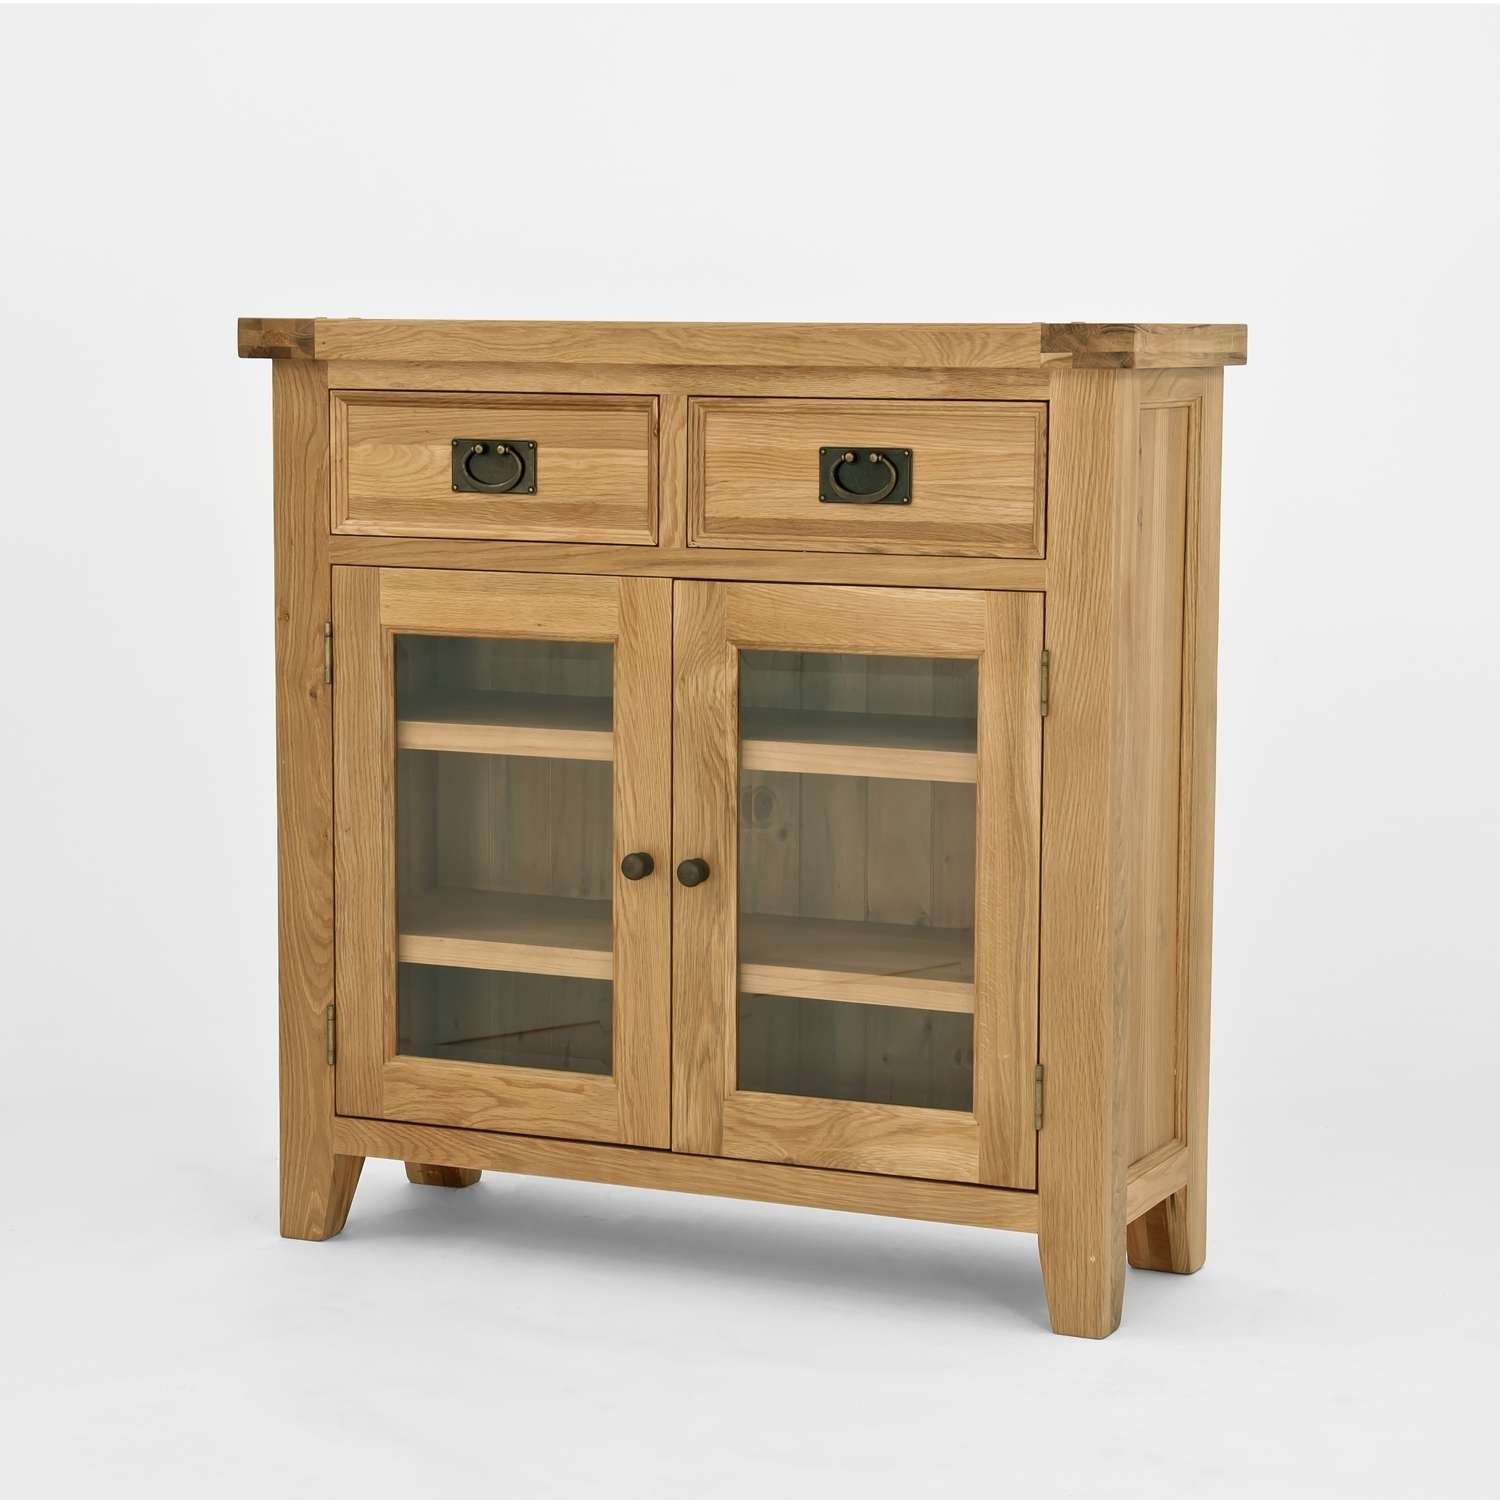 Chiltern Oak Small Sideboard/bookcase With Glass Doors Within Sideboards With Glass Doors And Drawers (View 1 of 20)